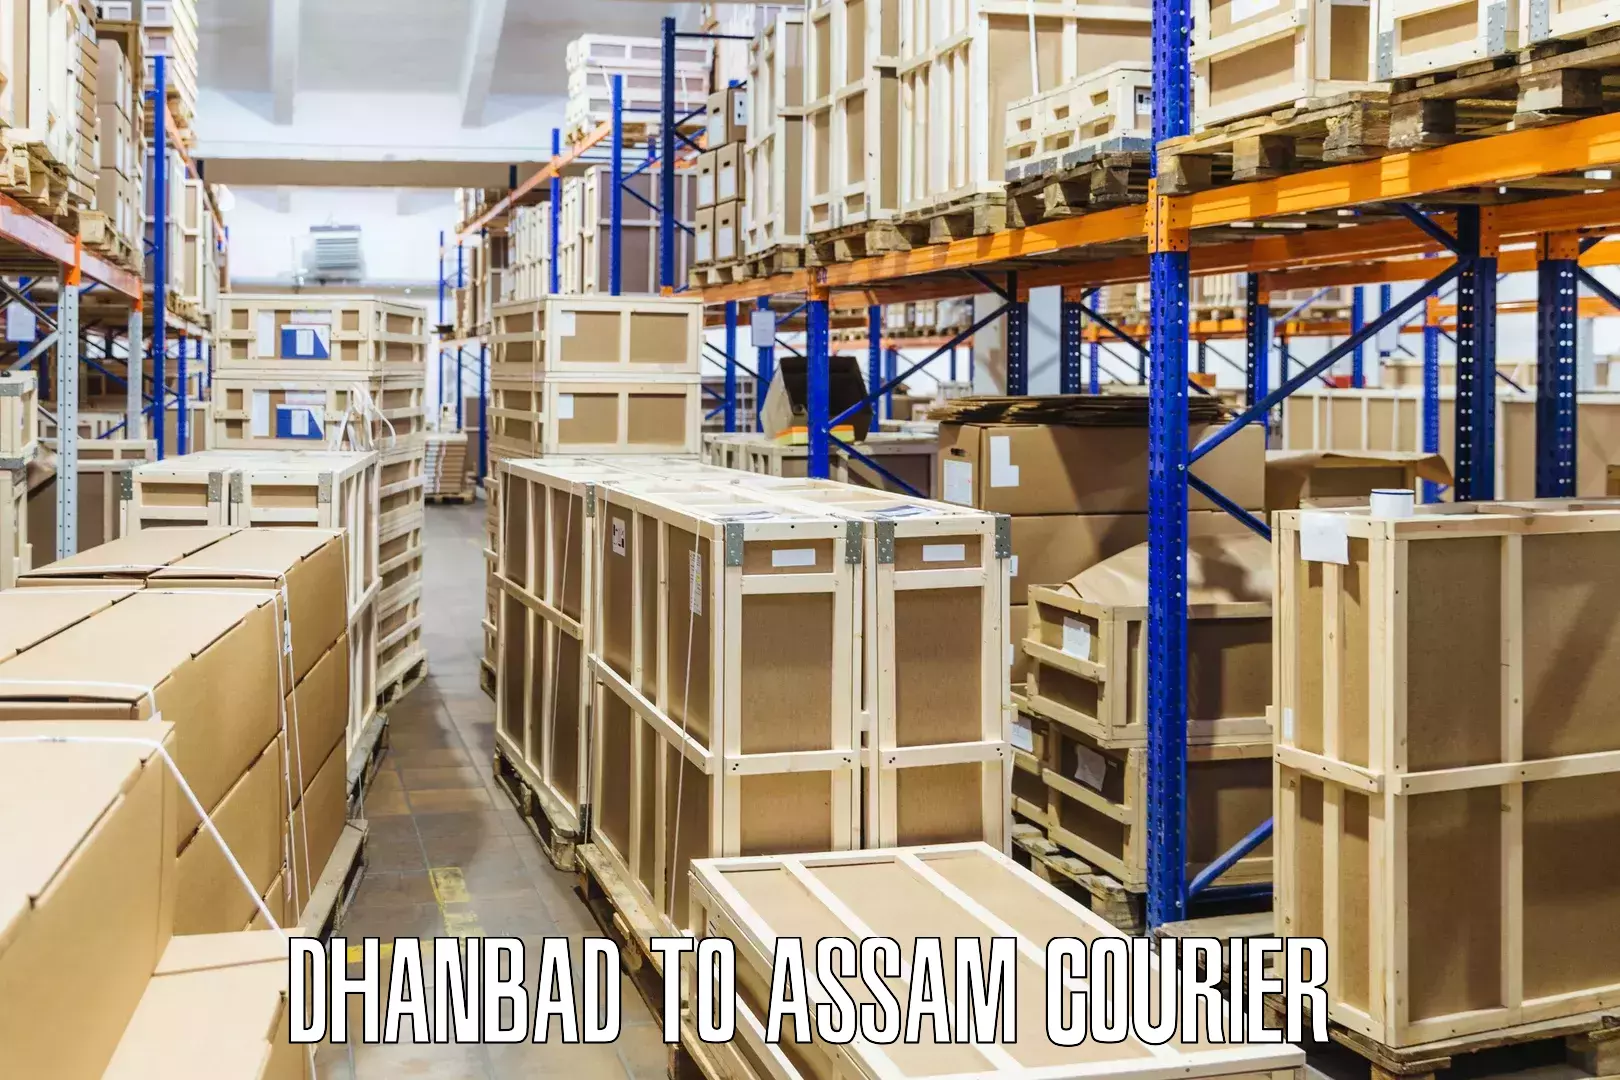 International courier networks Dhanbad to Goalpara